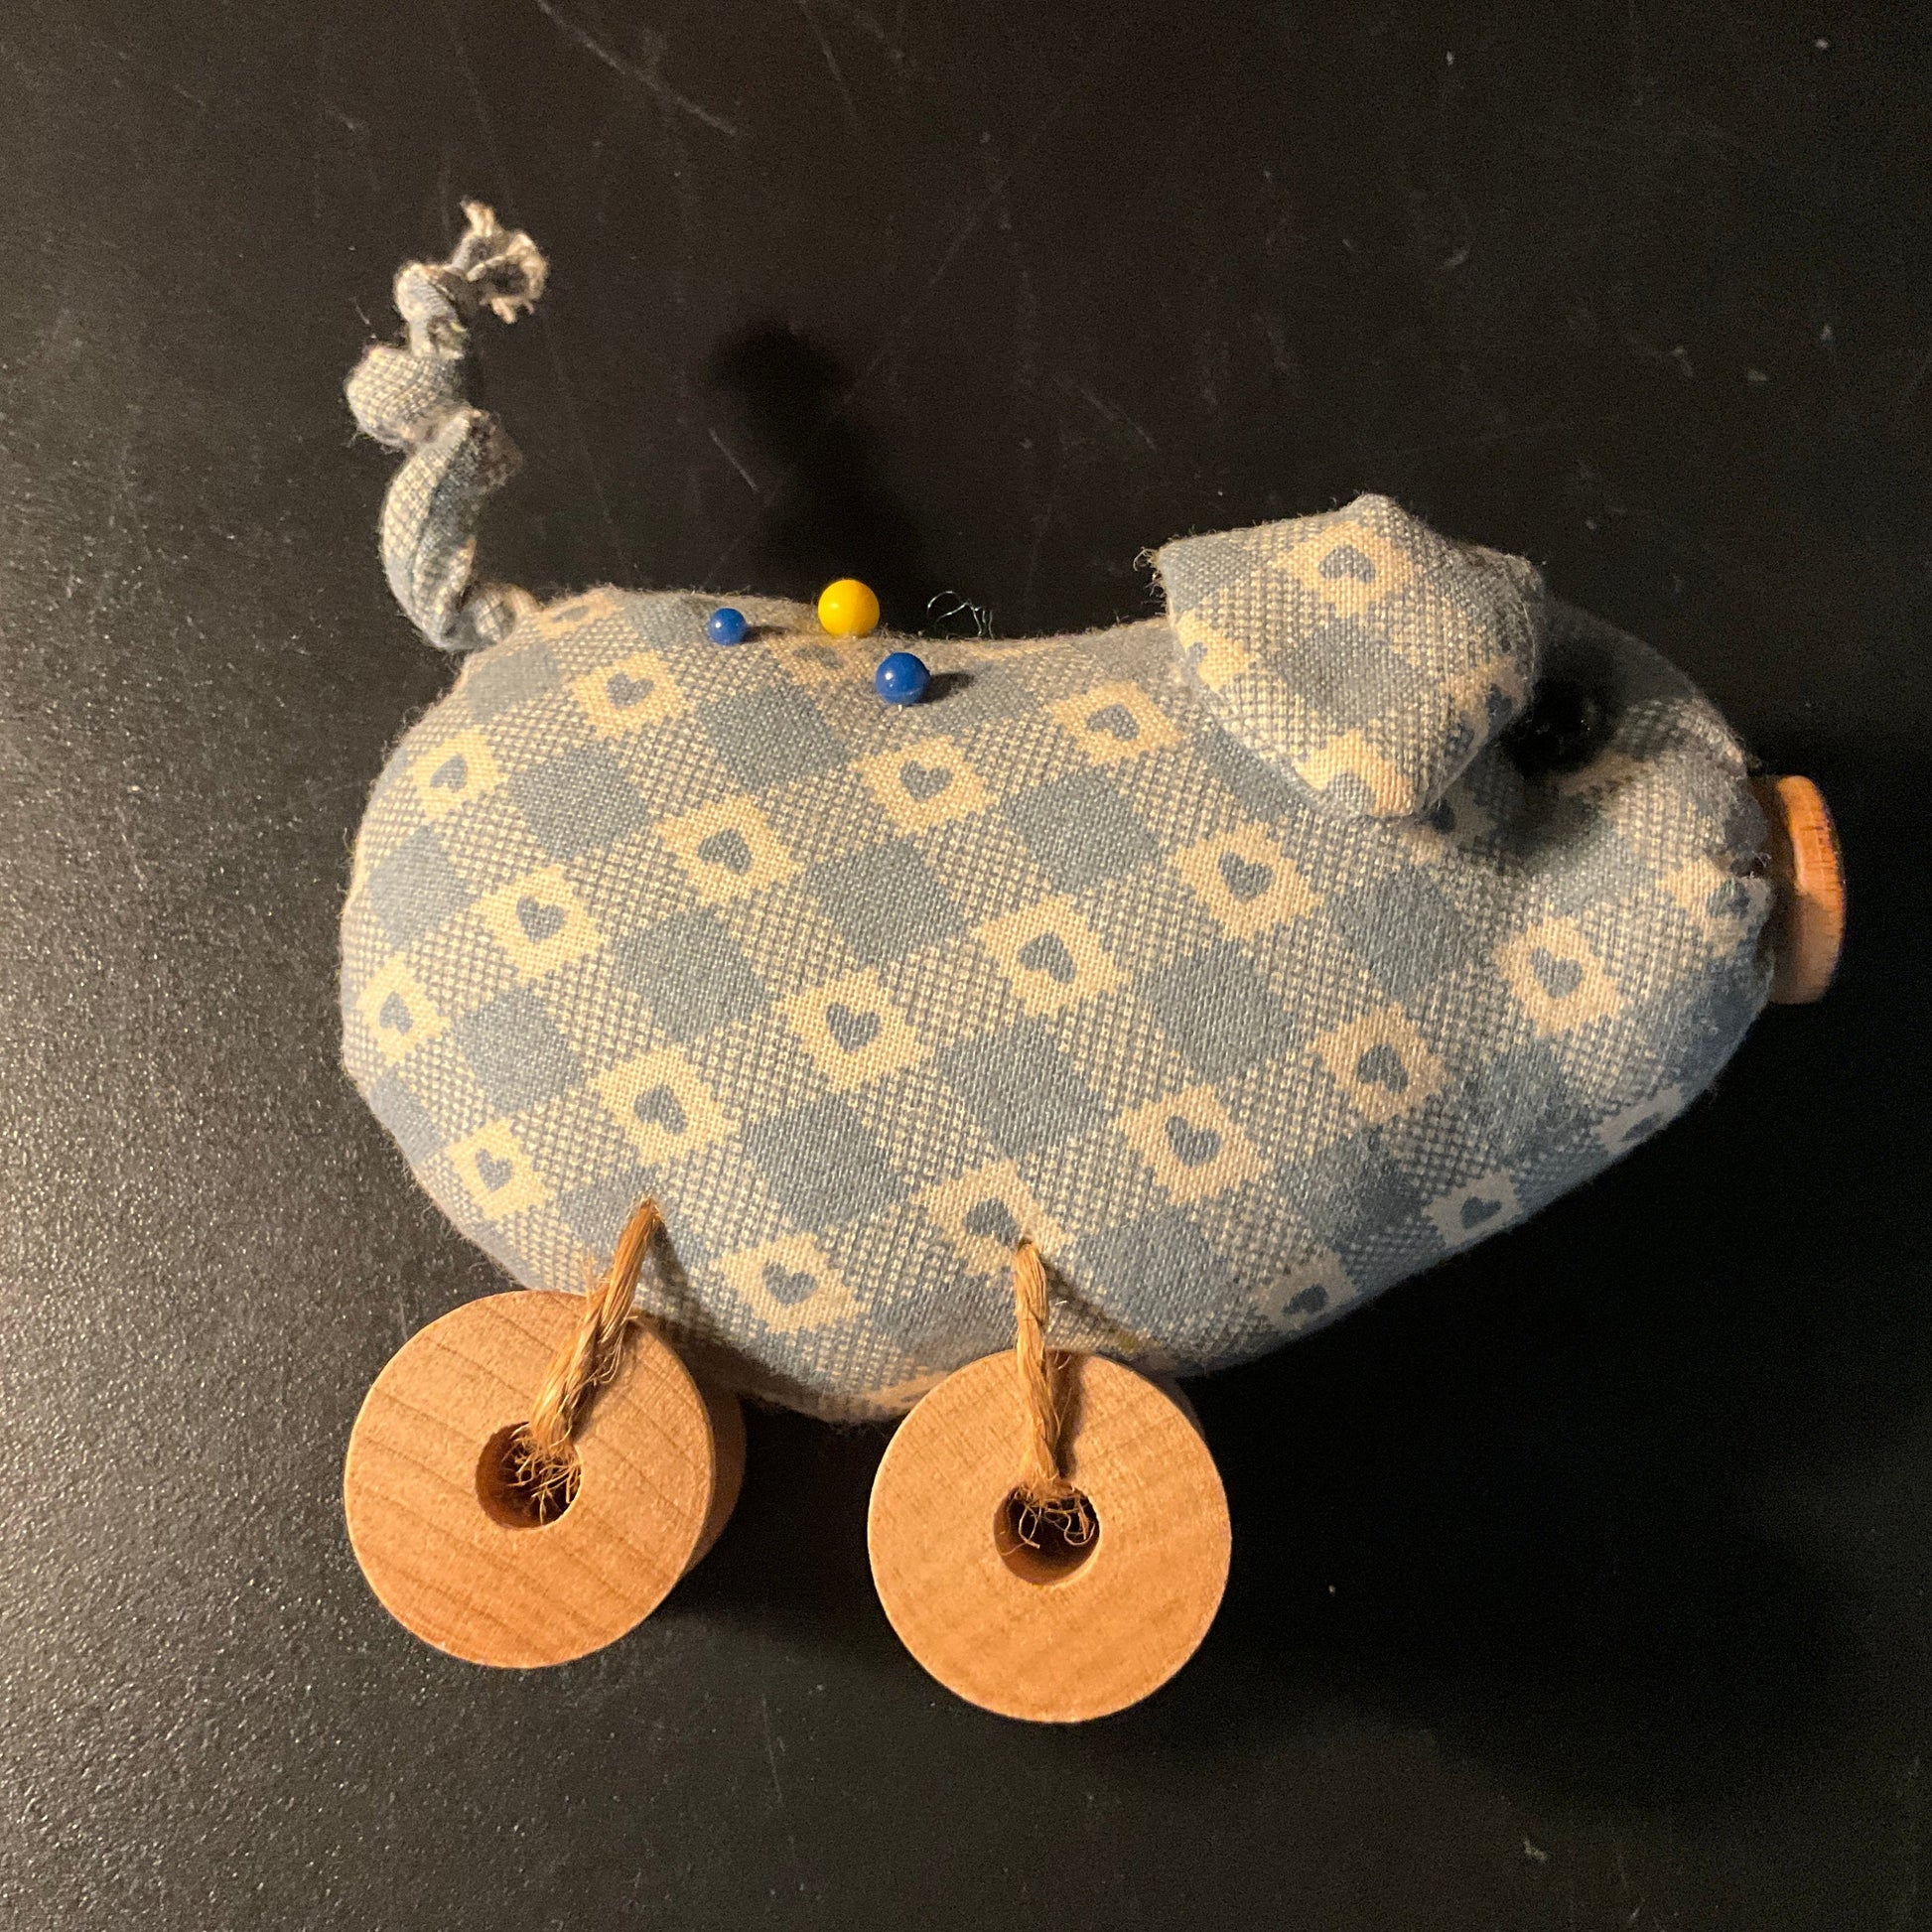 Magnificent mouse on wheels pincushion hand made folk art vintage sewing notion collectible*